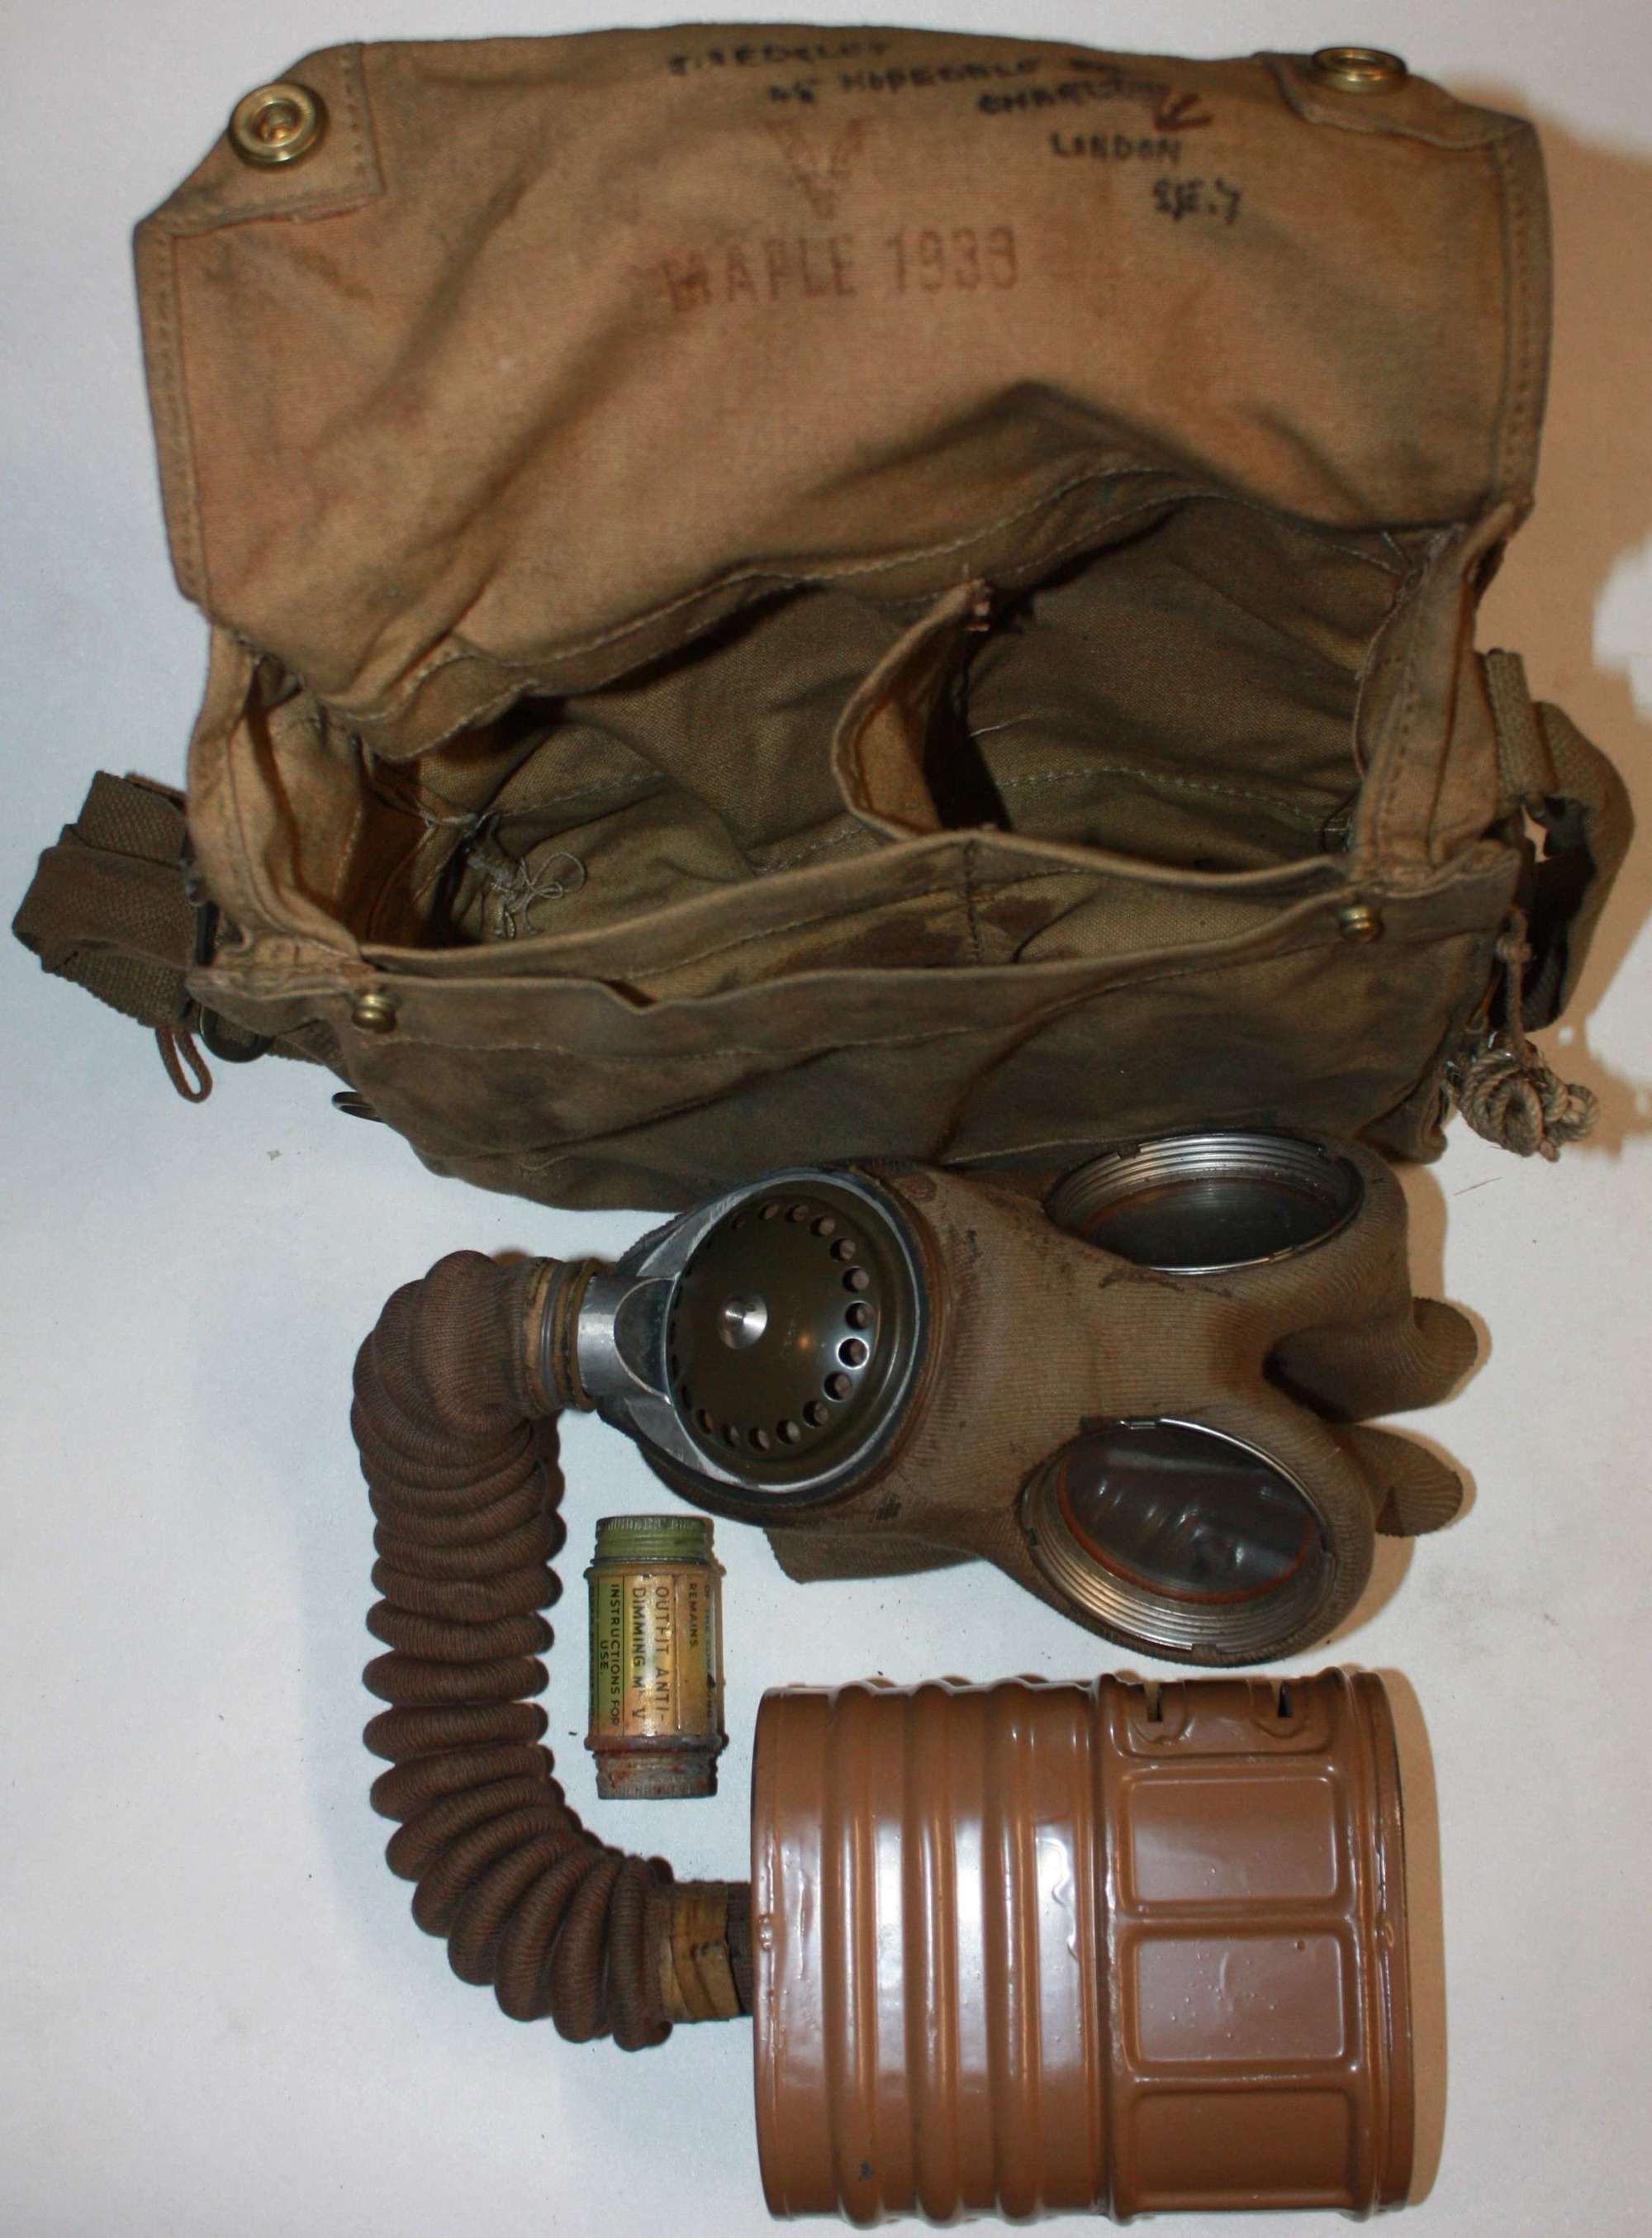 A GOOD EXAMPLE OPF THE BRITISH ARMY 1938 DATED GAS MASK AND MKV BAG